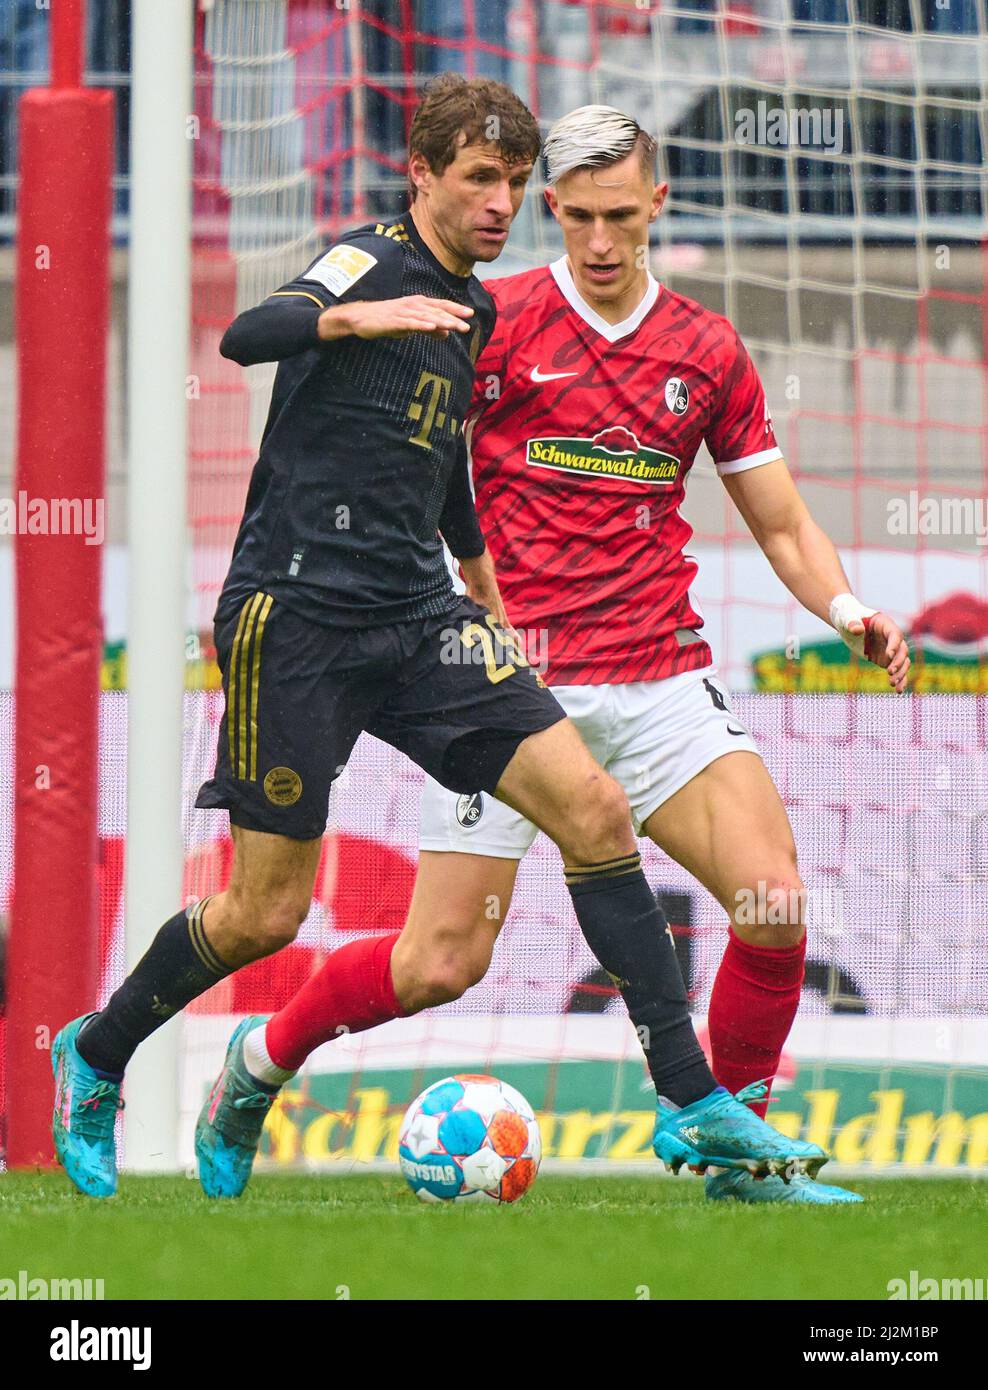 Freiburg, Germany. 02nd Apr, 2022. Eric MAXIM CHOUPO-MOTING (FCB 13)  compete for the ball, tackling, duel, header, zweikampf, action, fight against Nico Schlotterbeck, FRG 4  in the match SC FREIBURG - FC BAYERN MÜNCHEN 1-4 1.German Football League on April 2, 2022 in Freiburg, Germany. Season 2021/2022, matchday 28, 1.Bundesliga, FCB, München, 28.Spieltag. FCB, © Peter Schatz / Alamy Live News    - DFL REGULATIONS PROHIBIT ANY USE OF PHOTOGRAPHS as IMAGE SEQUENCES and/or QUASI-VIDEO - Credit: Peter Schatz/Alamy Live News Stock Photo